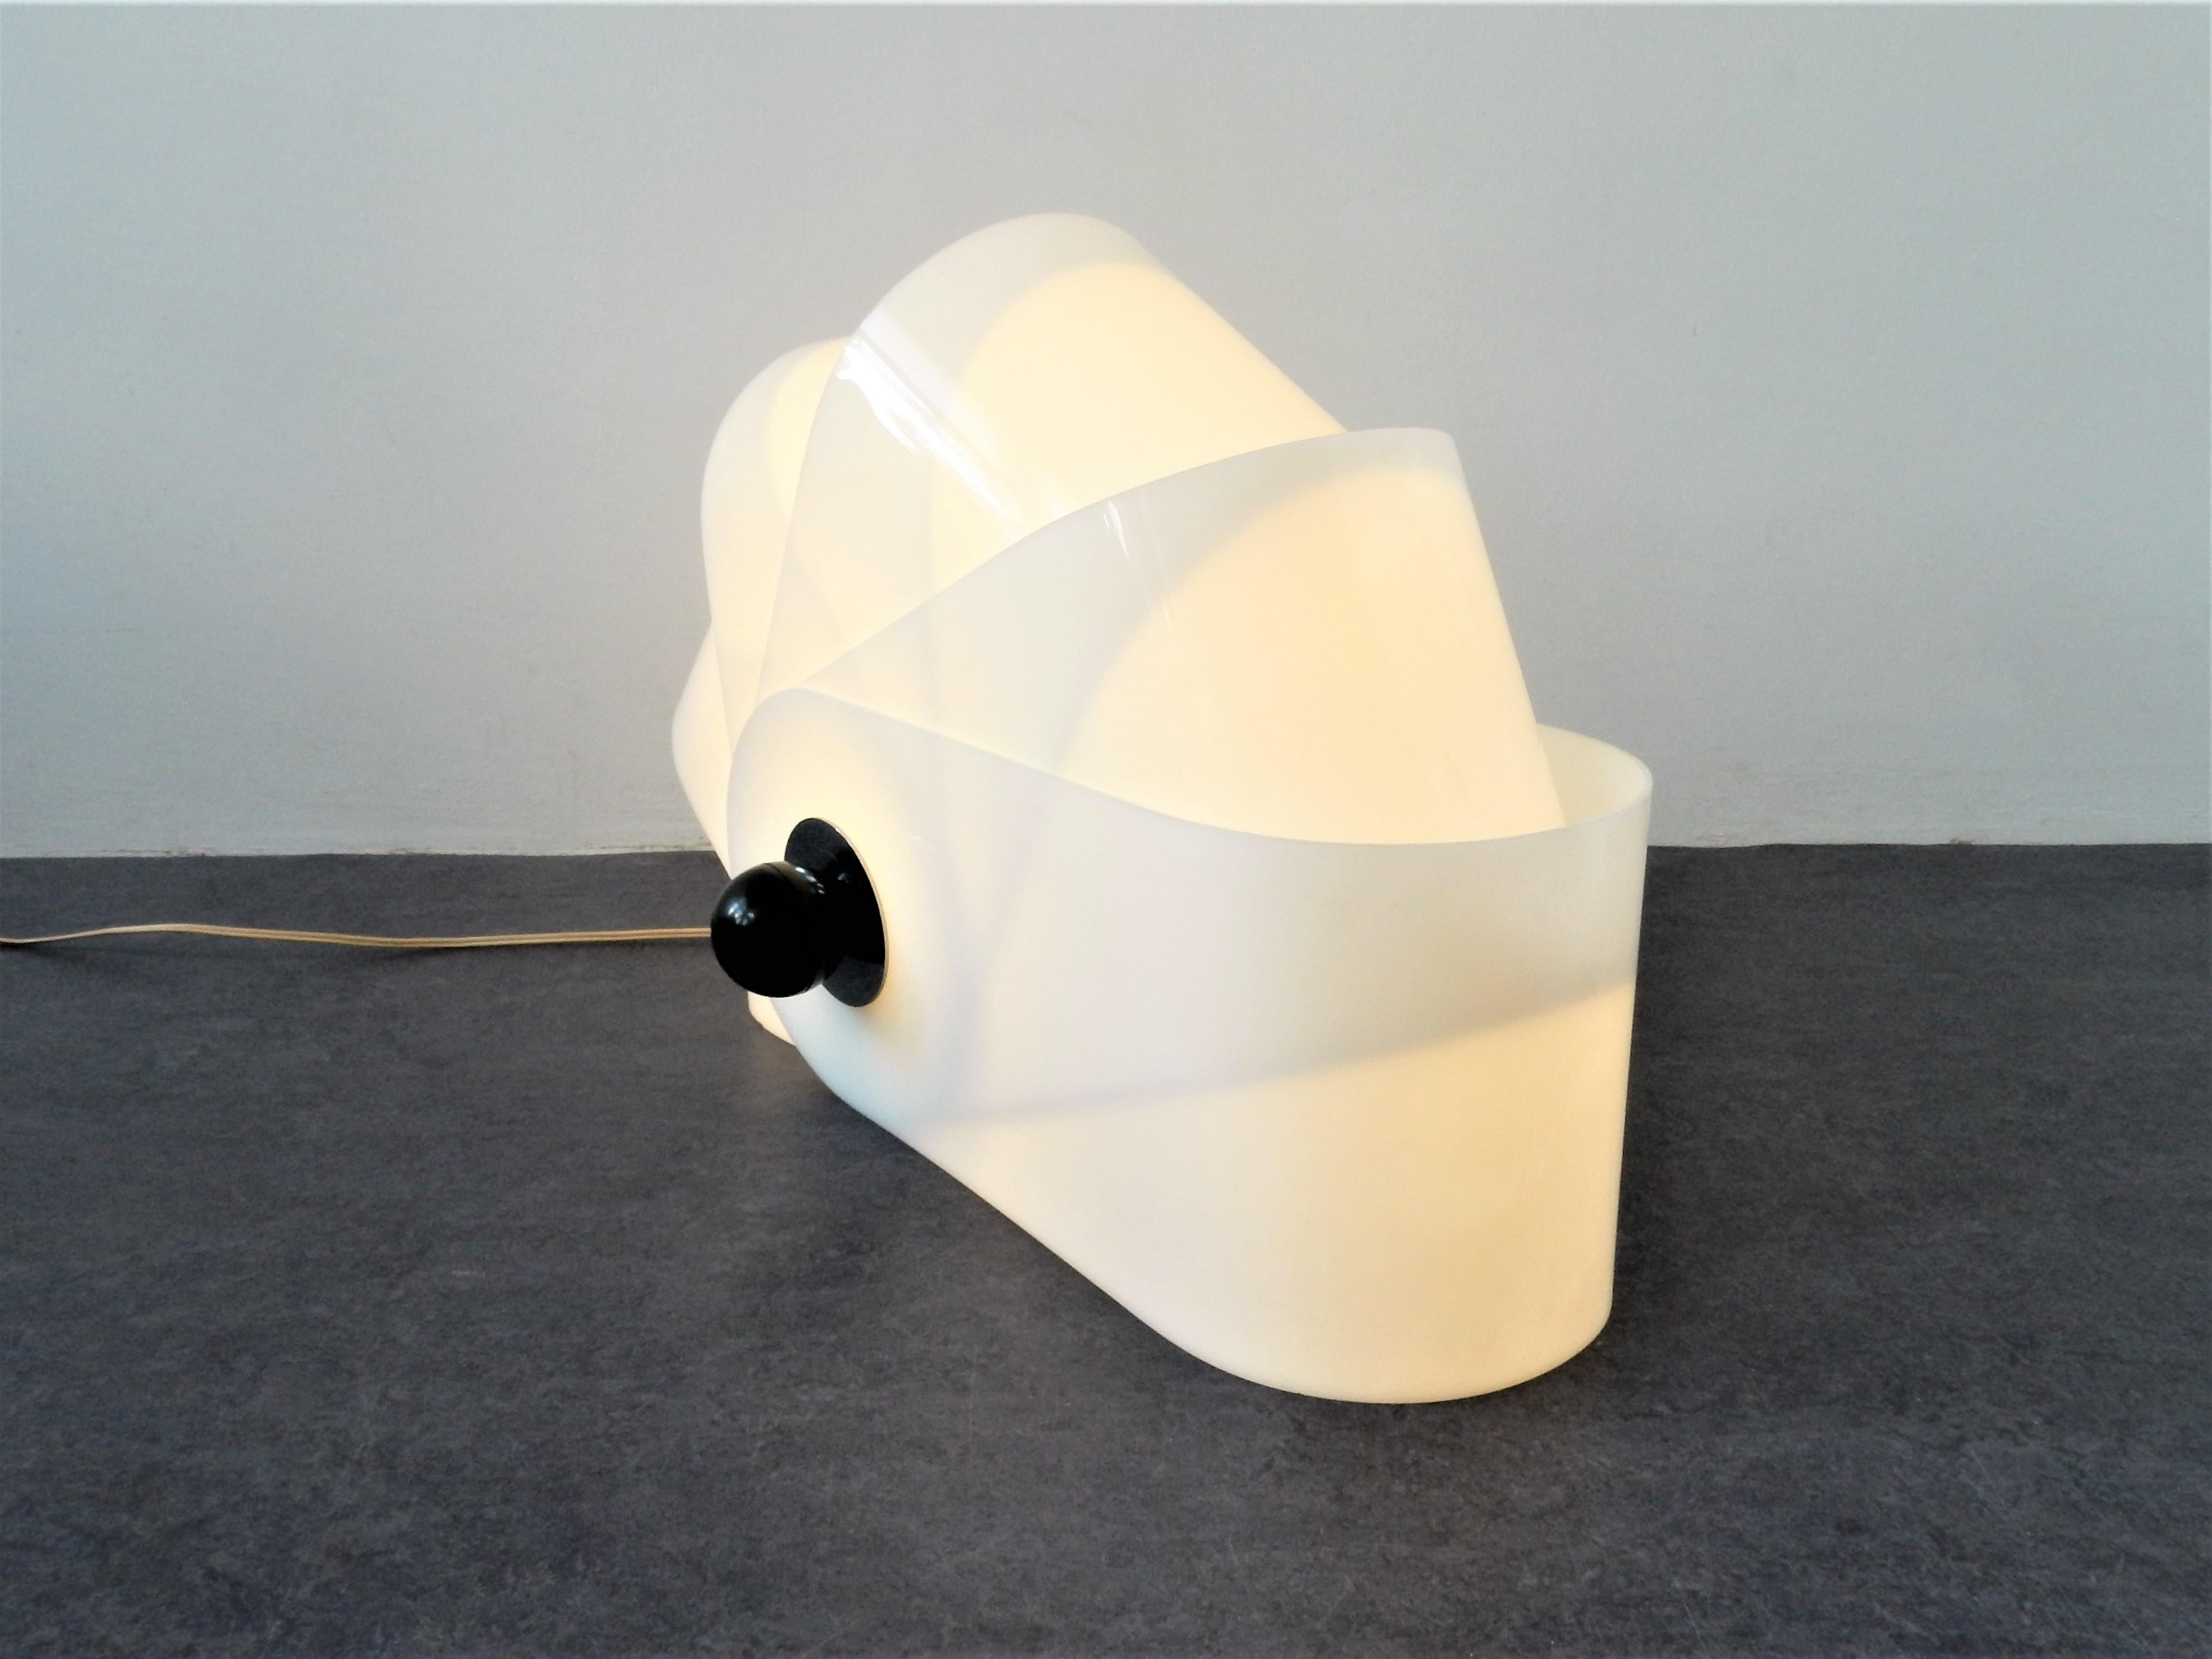 Mid-Century Modern White Acrylic 'Gherpe' Floor Lamp by Superstudio for Poltronova, Italy, 1967